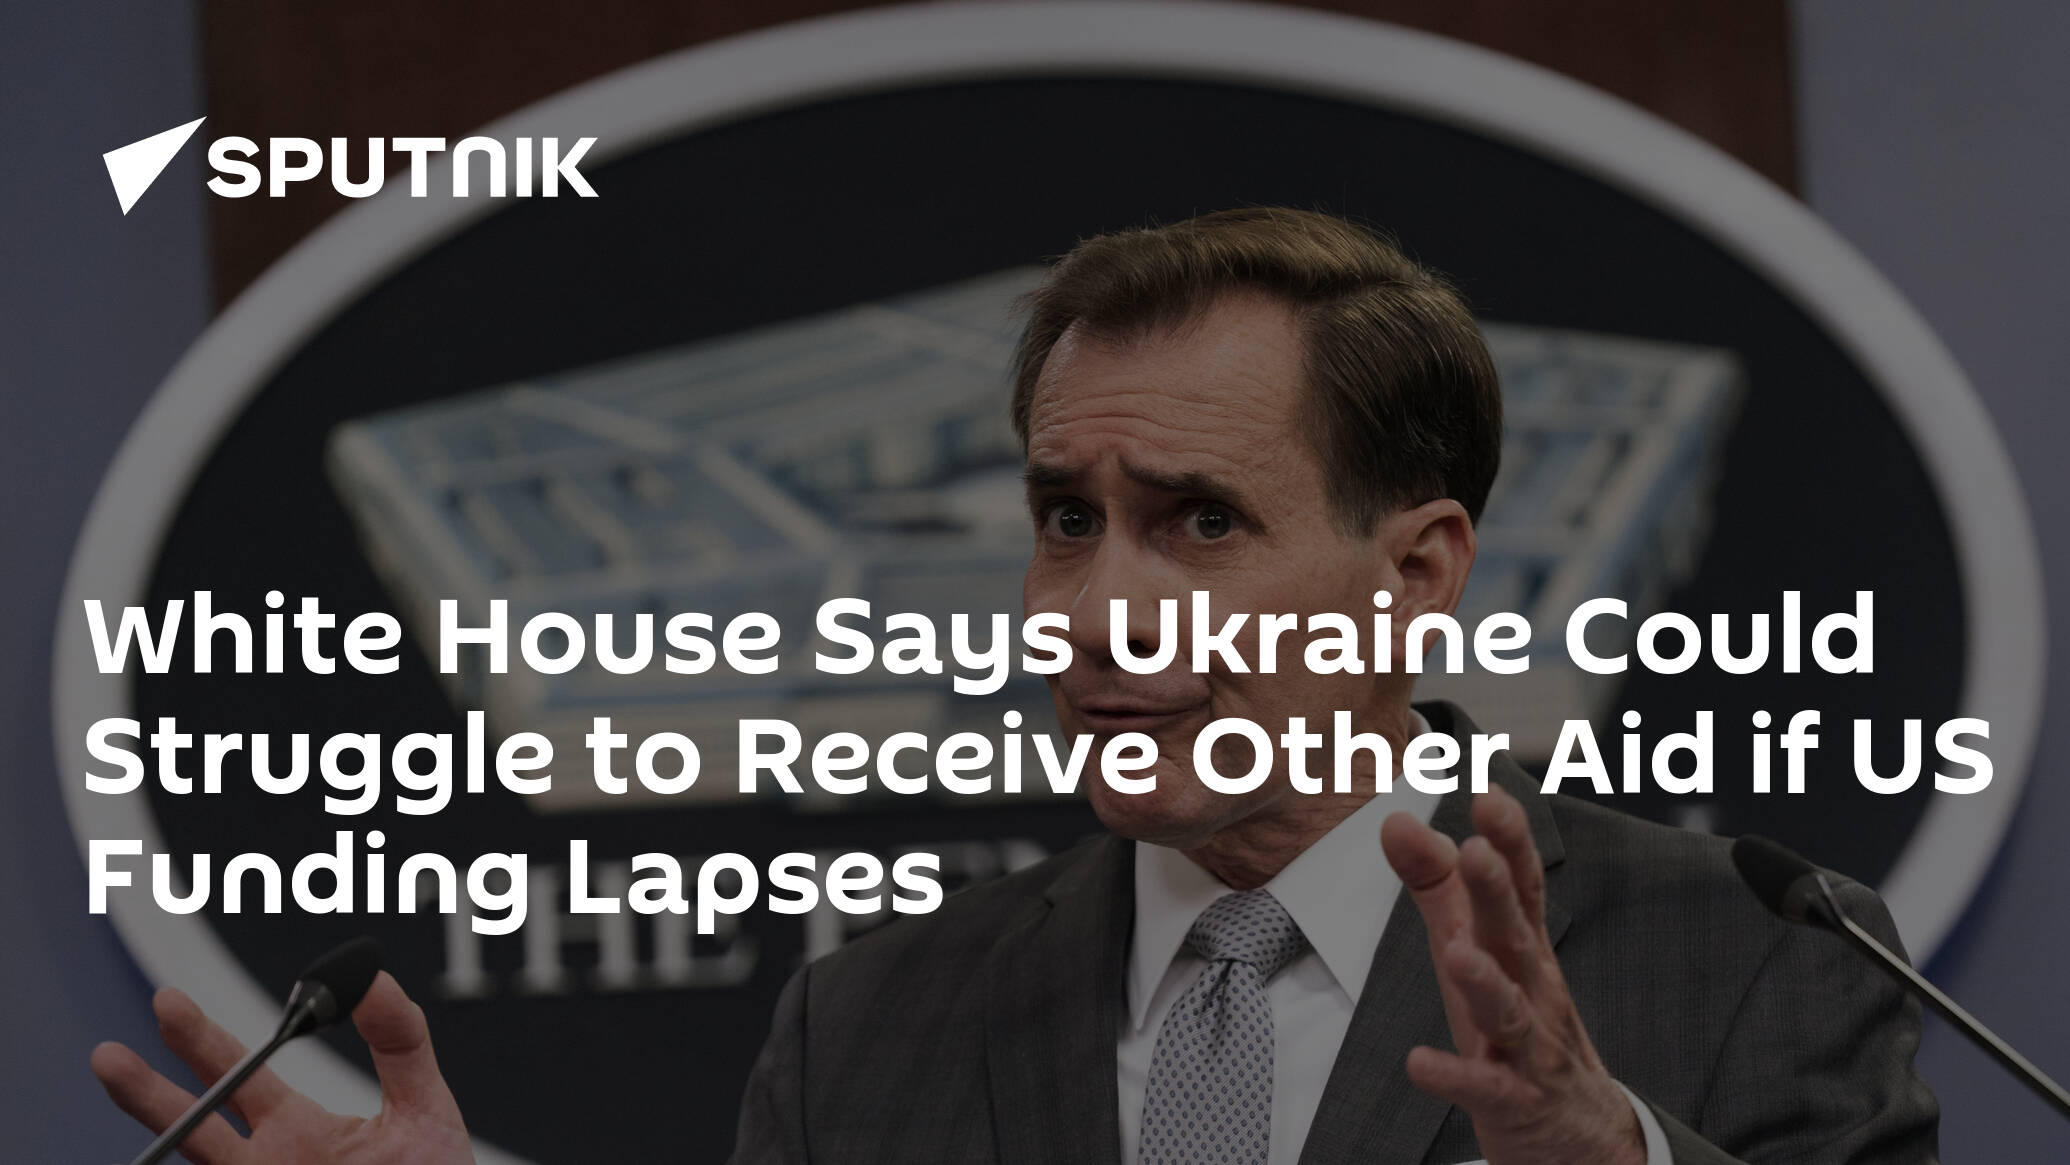 White House Says Ukraine Could Struggle to Receive Other Aid if US Funding Lapses